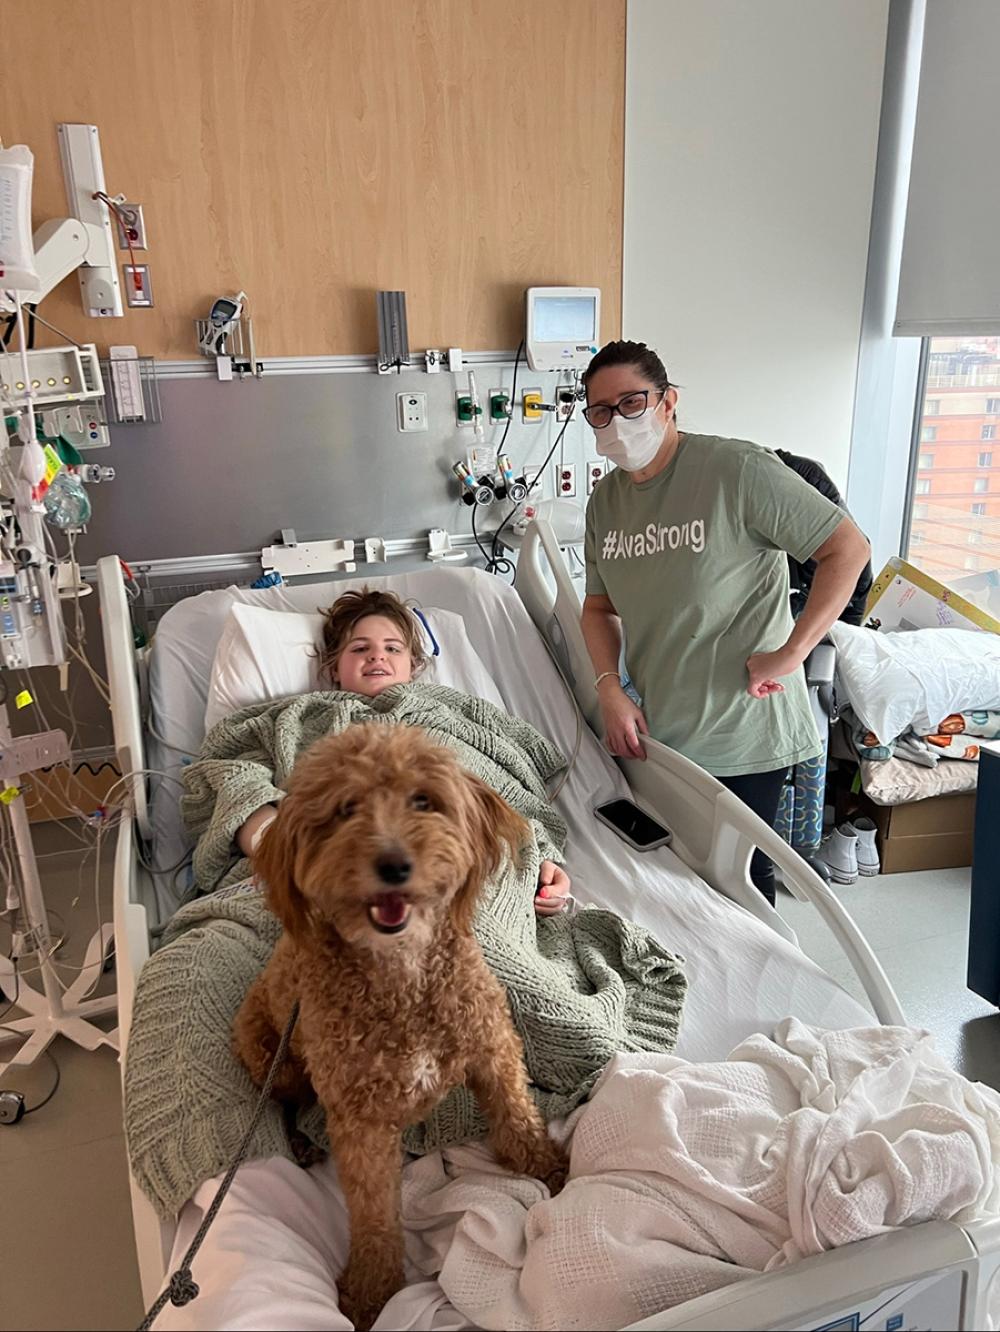 Ava in Hospital Bed with Therapy Dog and Mother Standing Beside Her